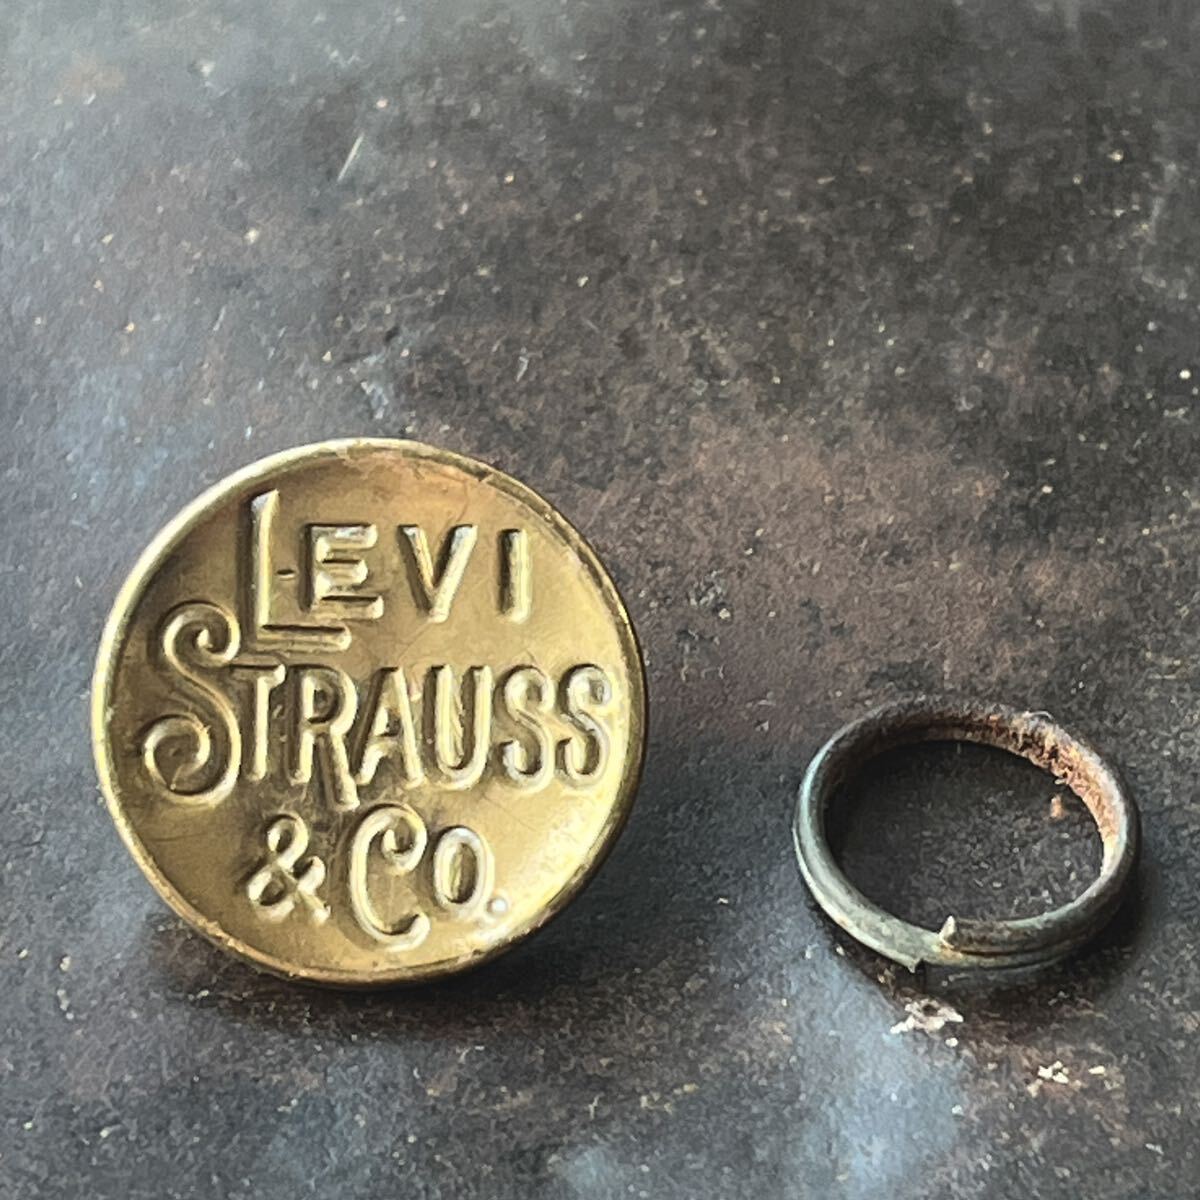  ultra rare Levi\'s antique change button USA Carhartt LVC coverall Brass overall 10s old clothes 30s Levi's Levis Vintage 501XX